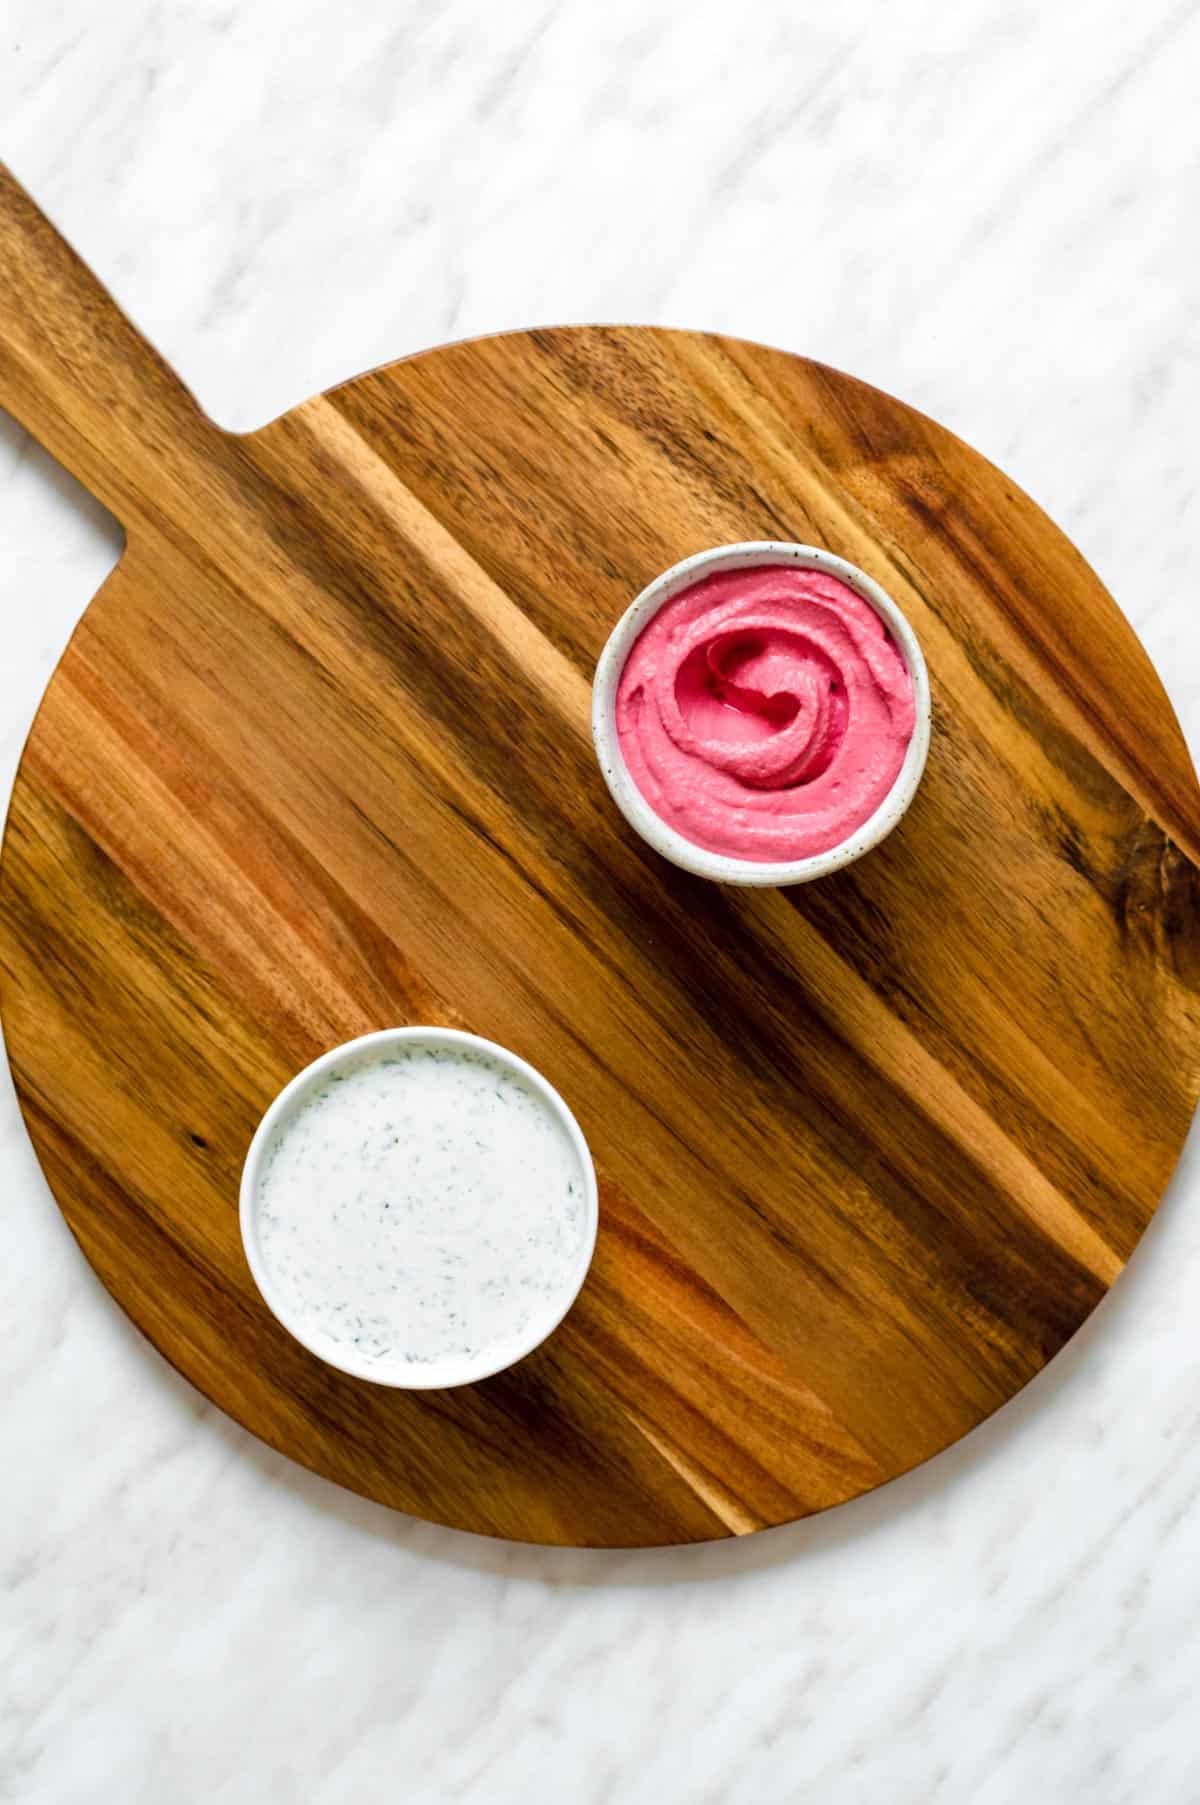 Two dips served in two white bowl, placed on a wooden board.